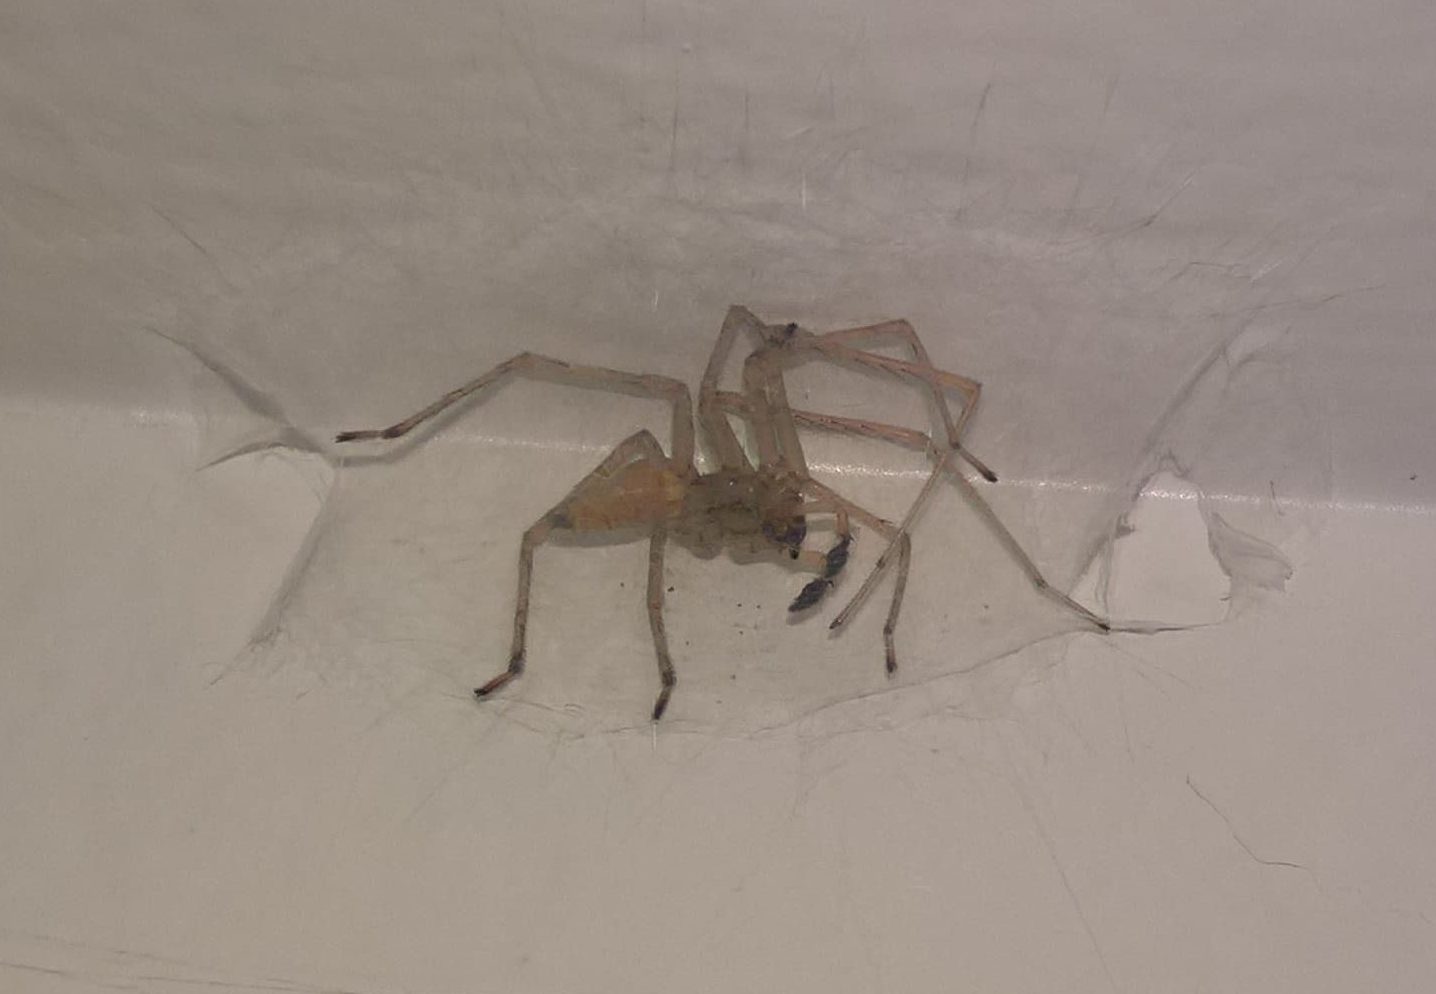 Picture of Cheiracanthium mildei (Long-legged Sac Spider) - Male - Ventral,In Retreat